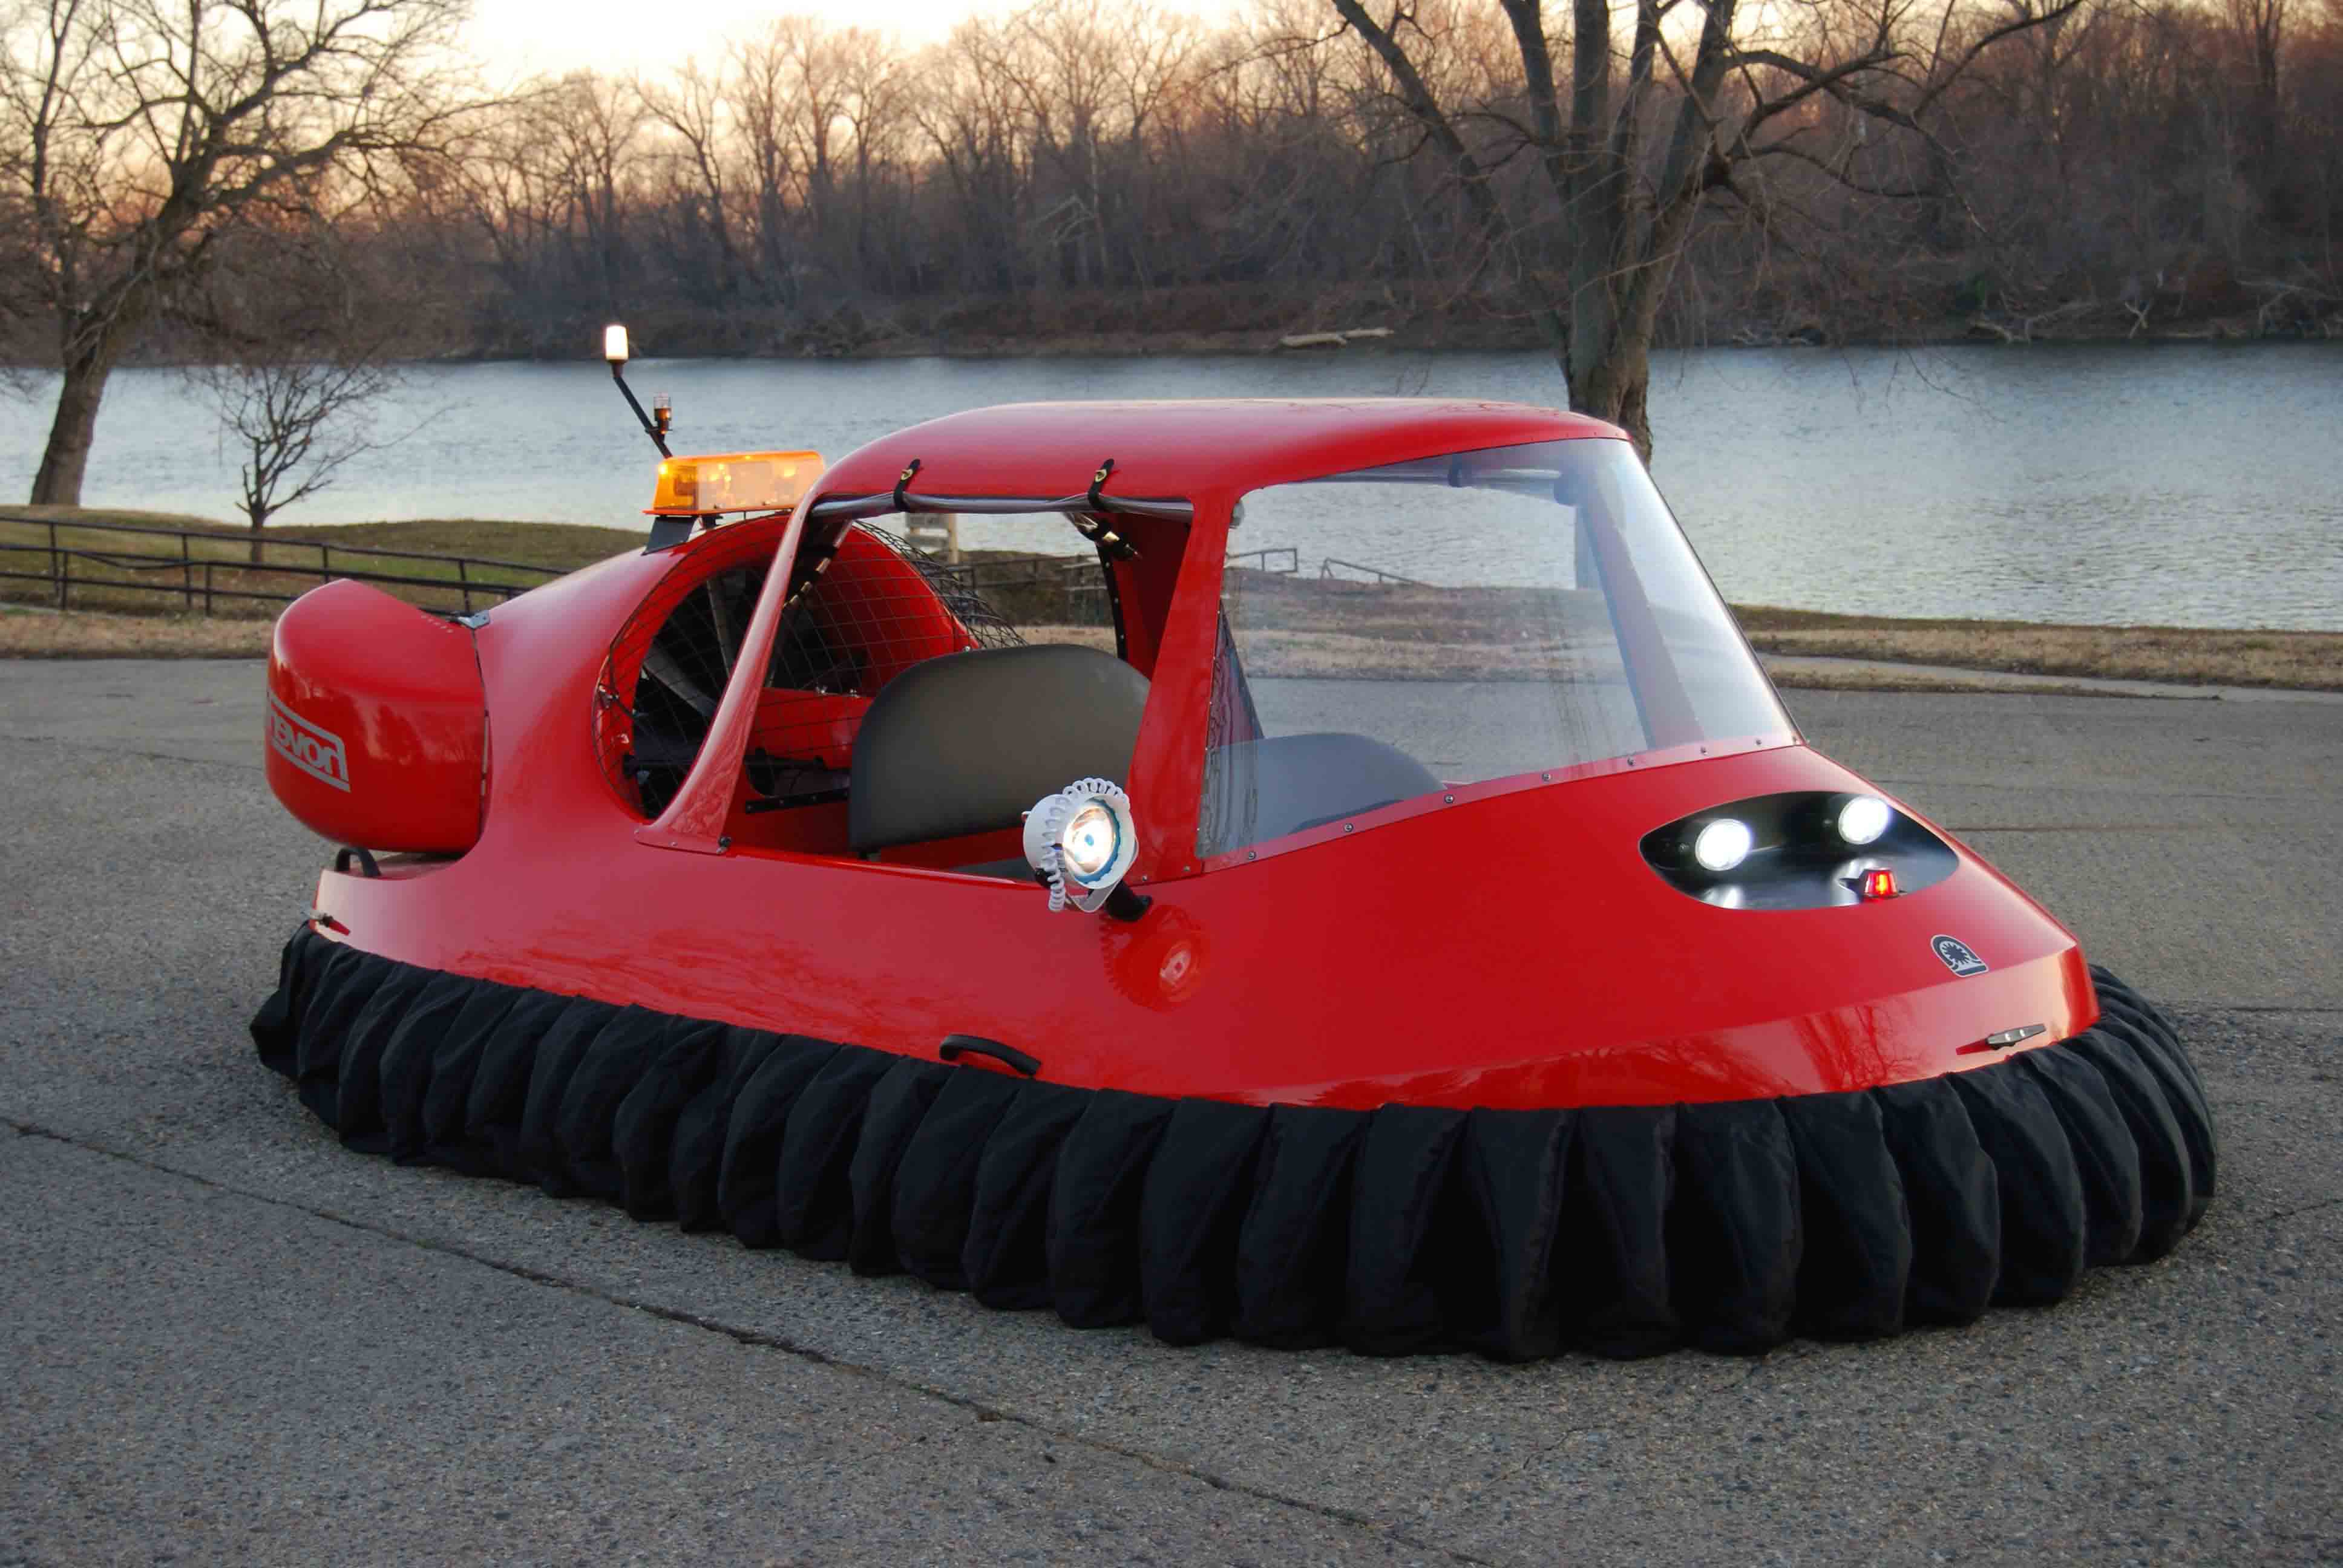 New and Used Hovercraft Currently In Our Inventory